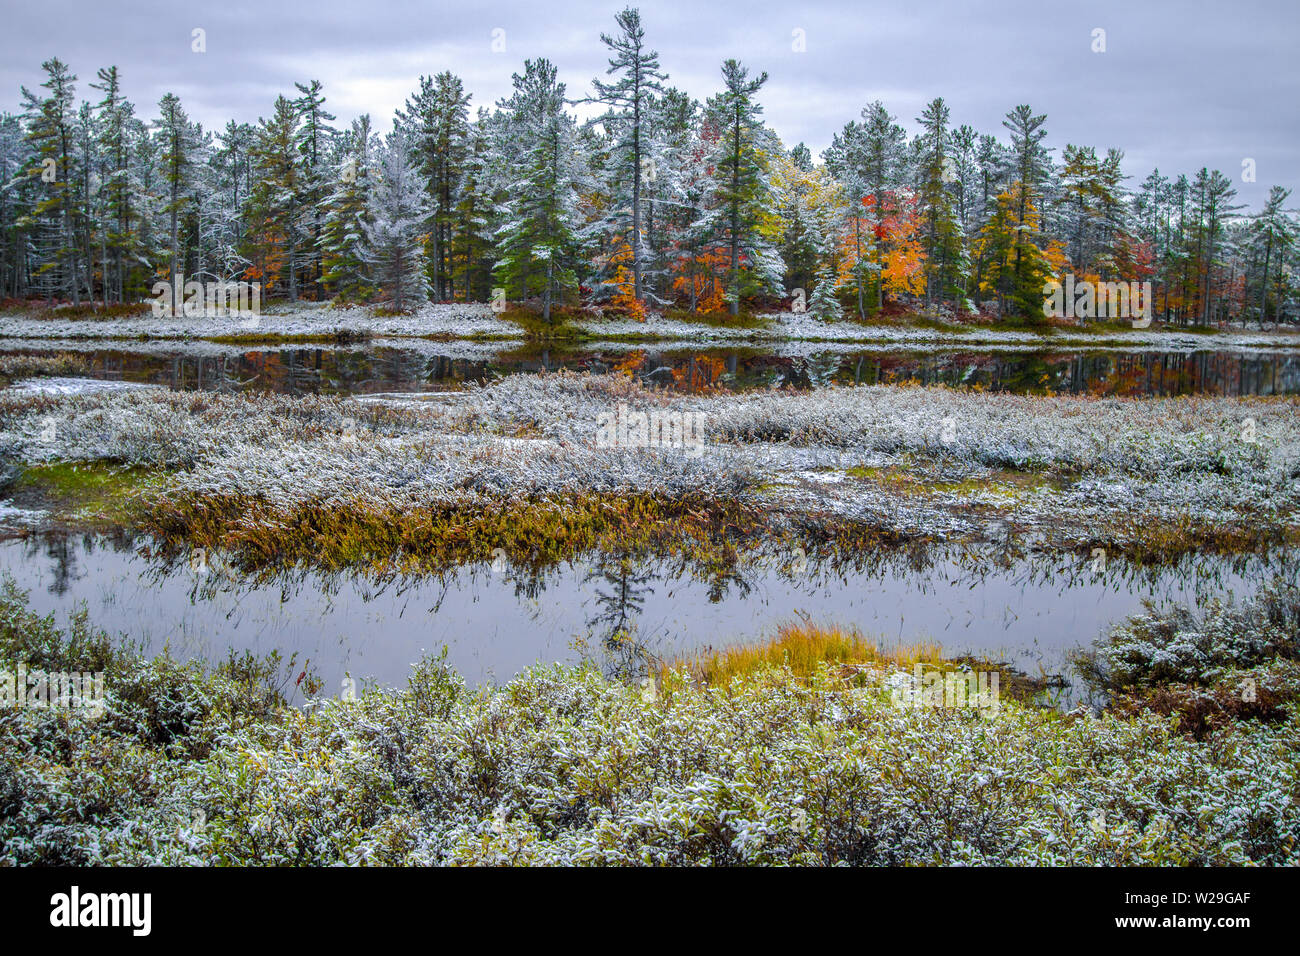 Michigan Winter Forest Landscape. Vast wilderness wetlands with fall foliage and a coating of fresh fallen snow on the scenic forest at the horizon Stock Photo